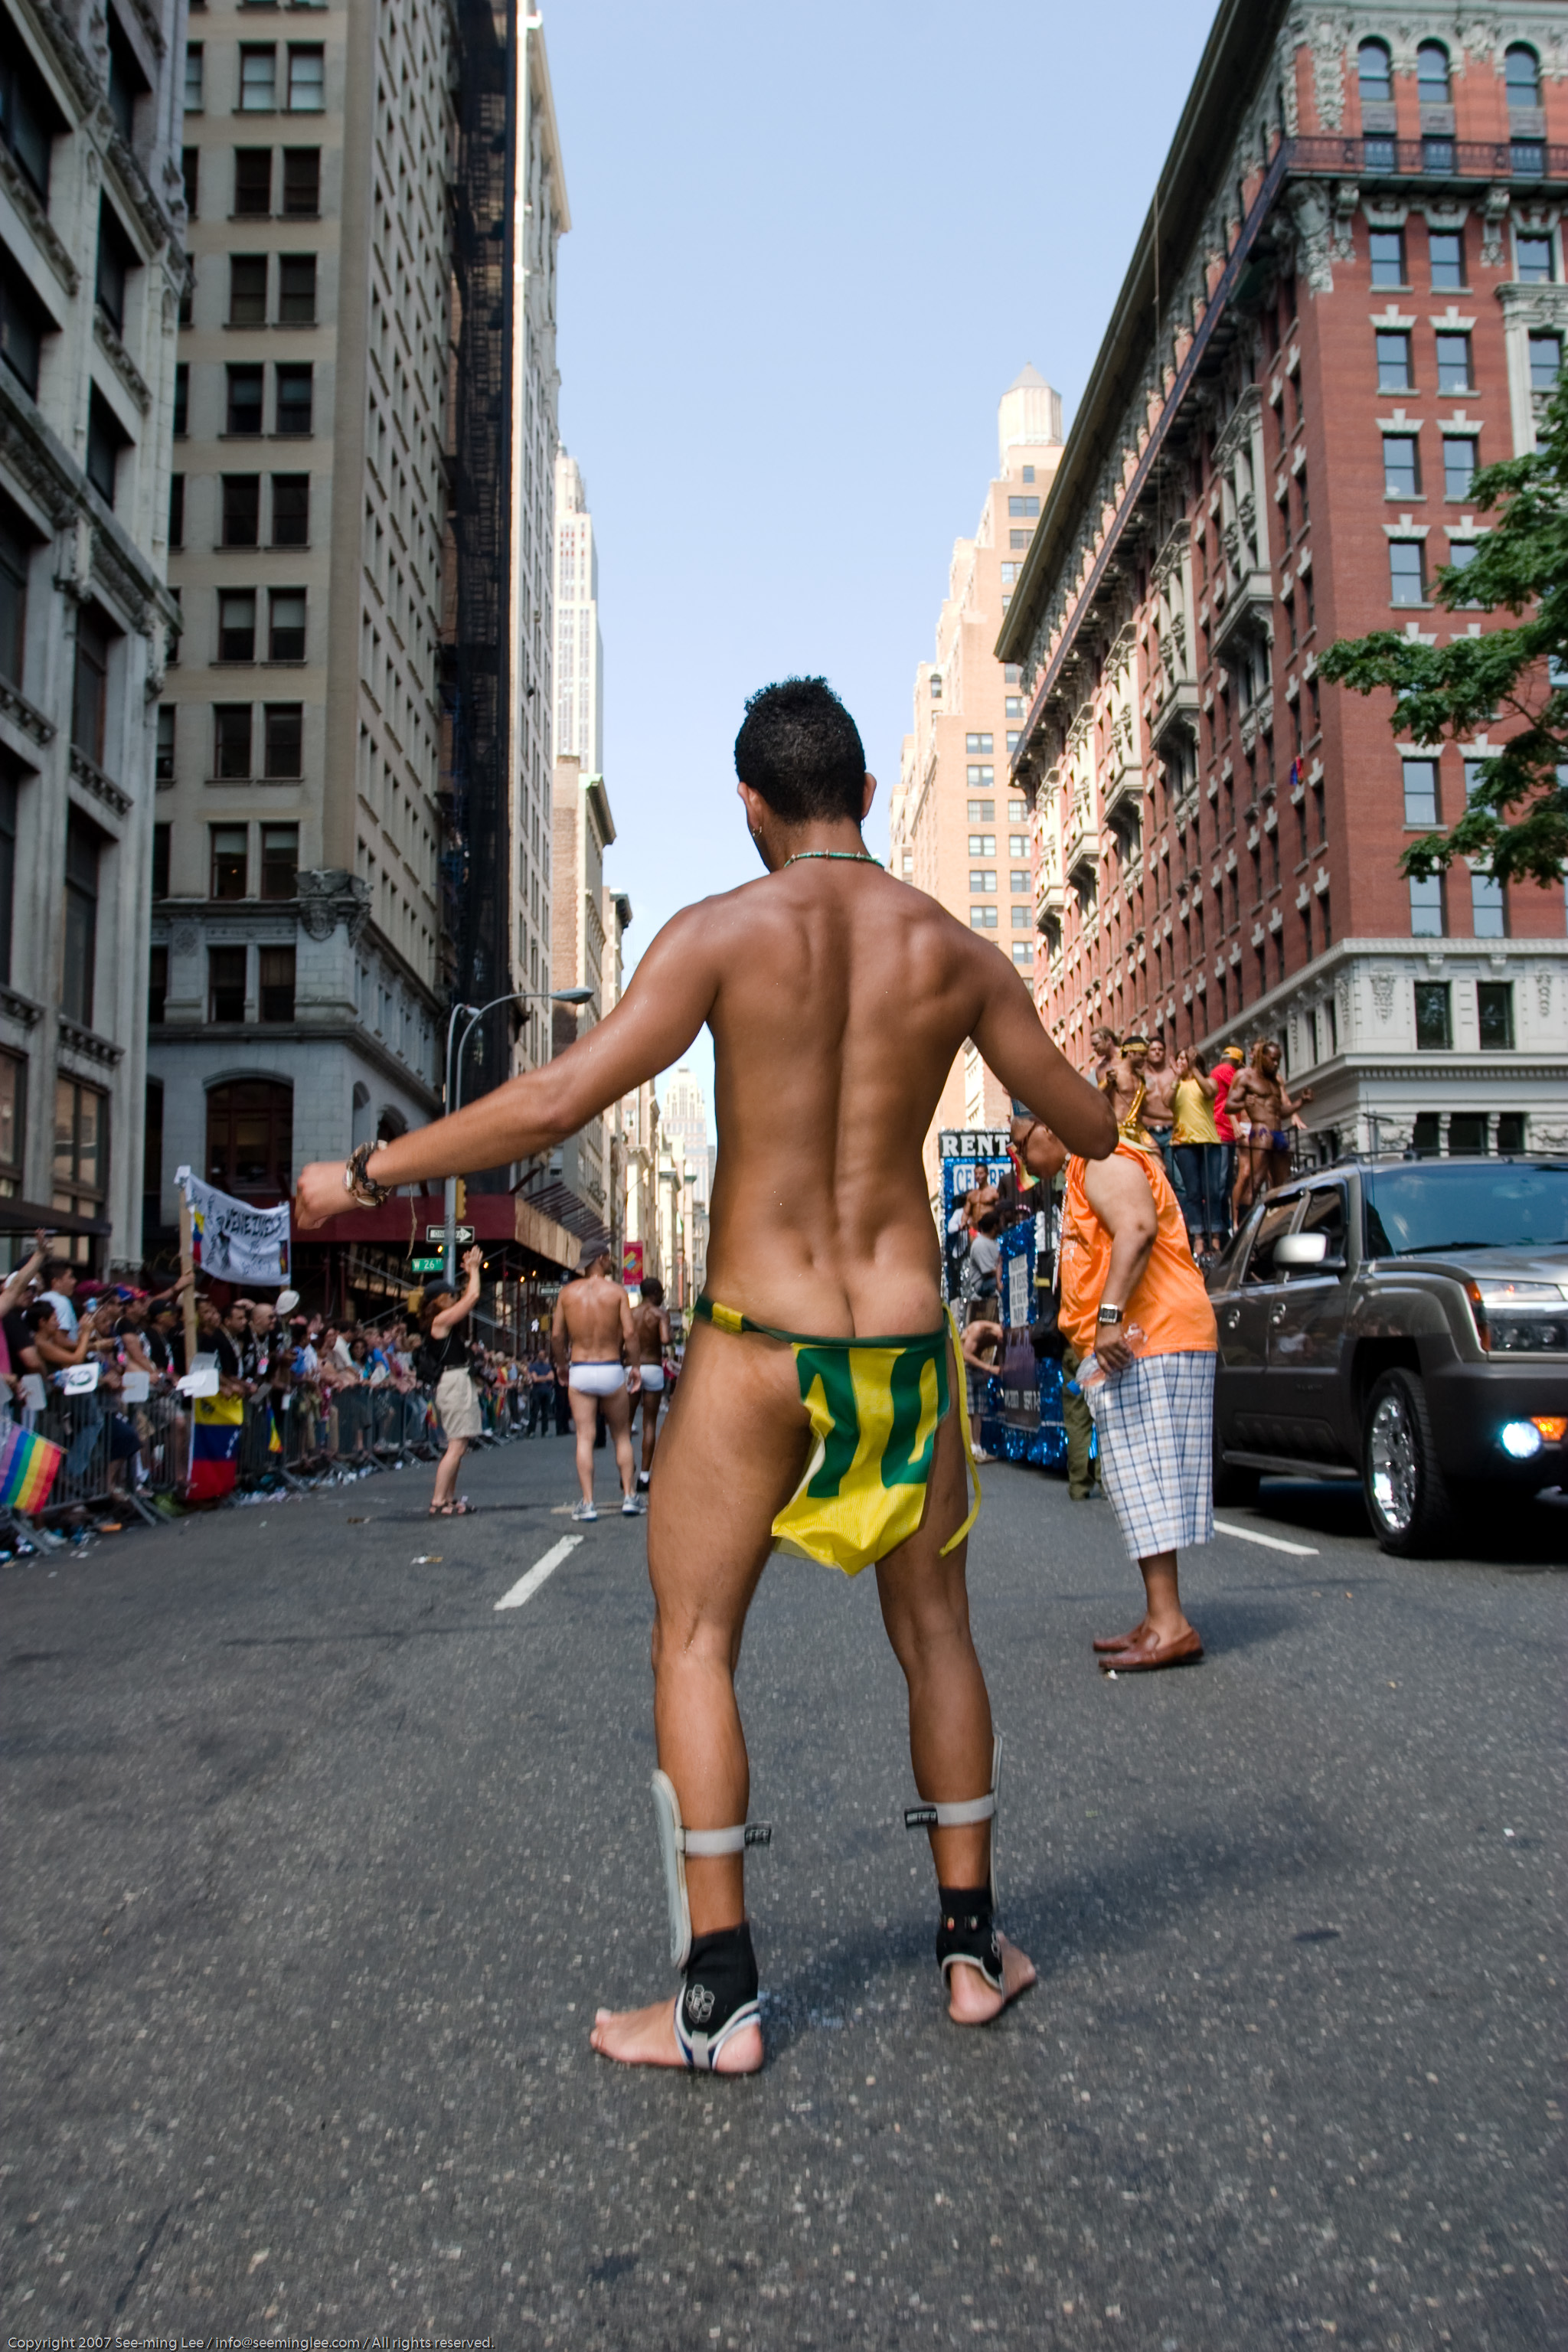 The evolving world of gay travel